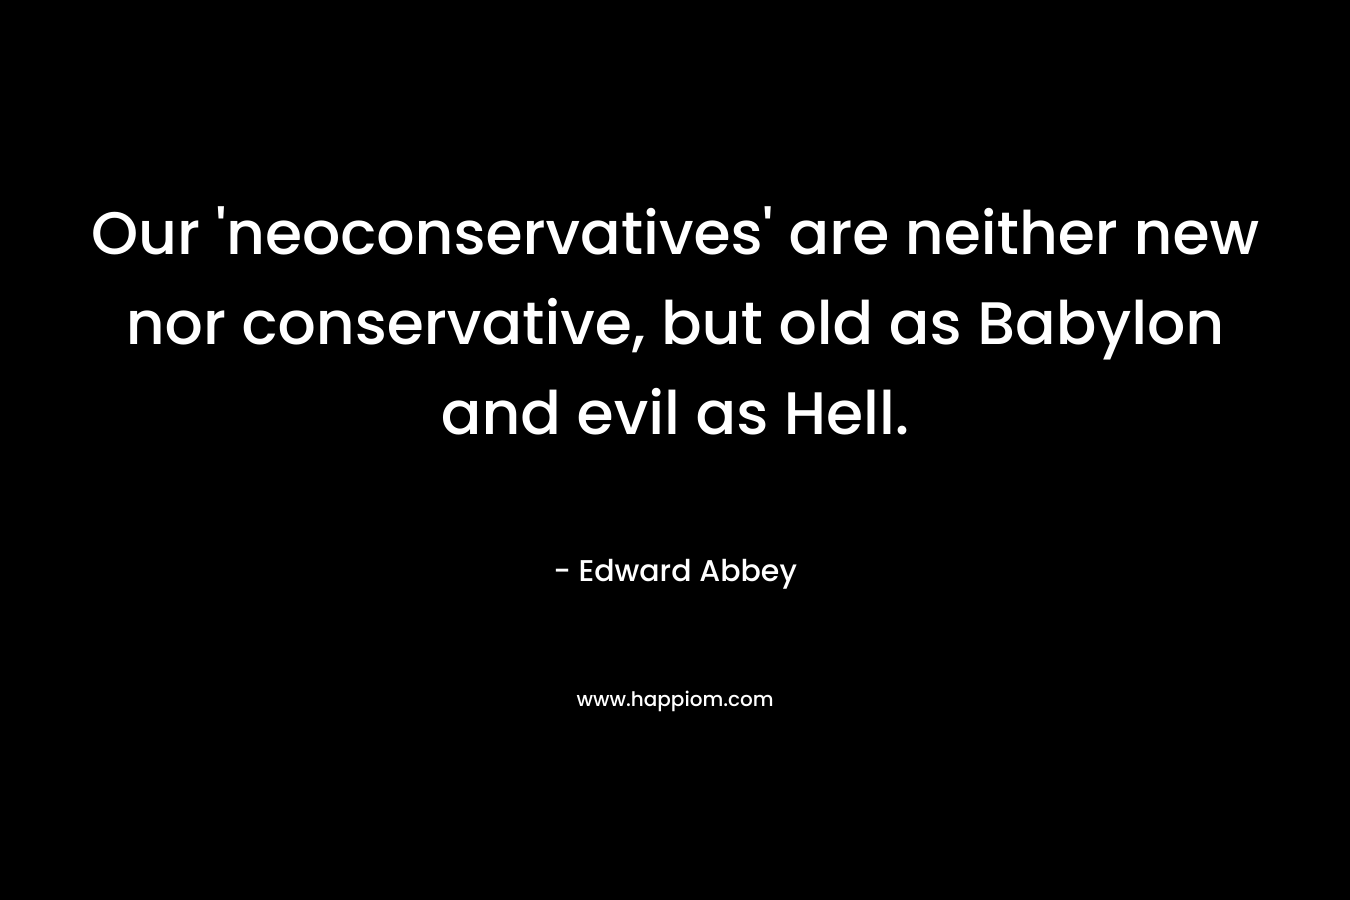 Our 'neoconservatives' are neither new nor conservative, but old as Babylon and evil as Hell.